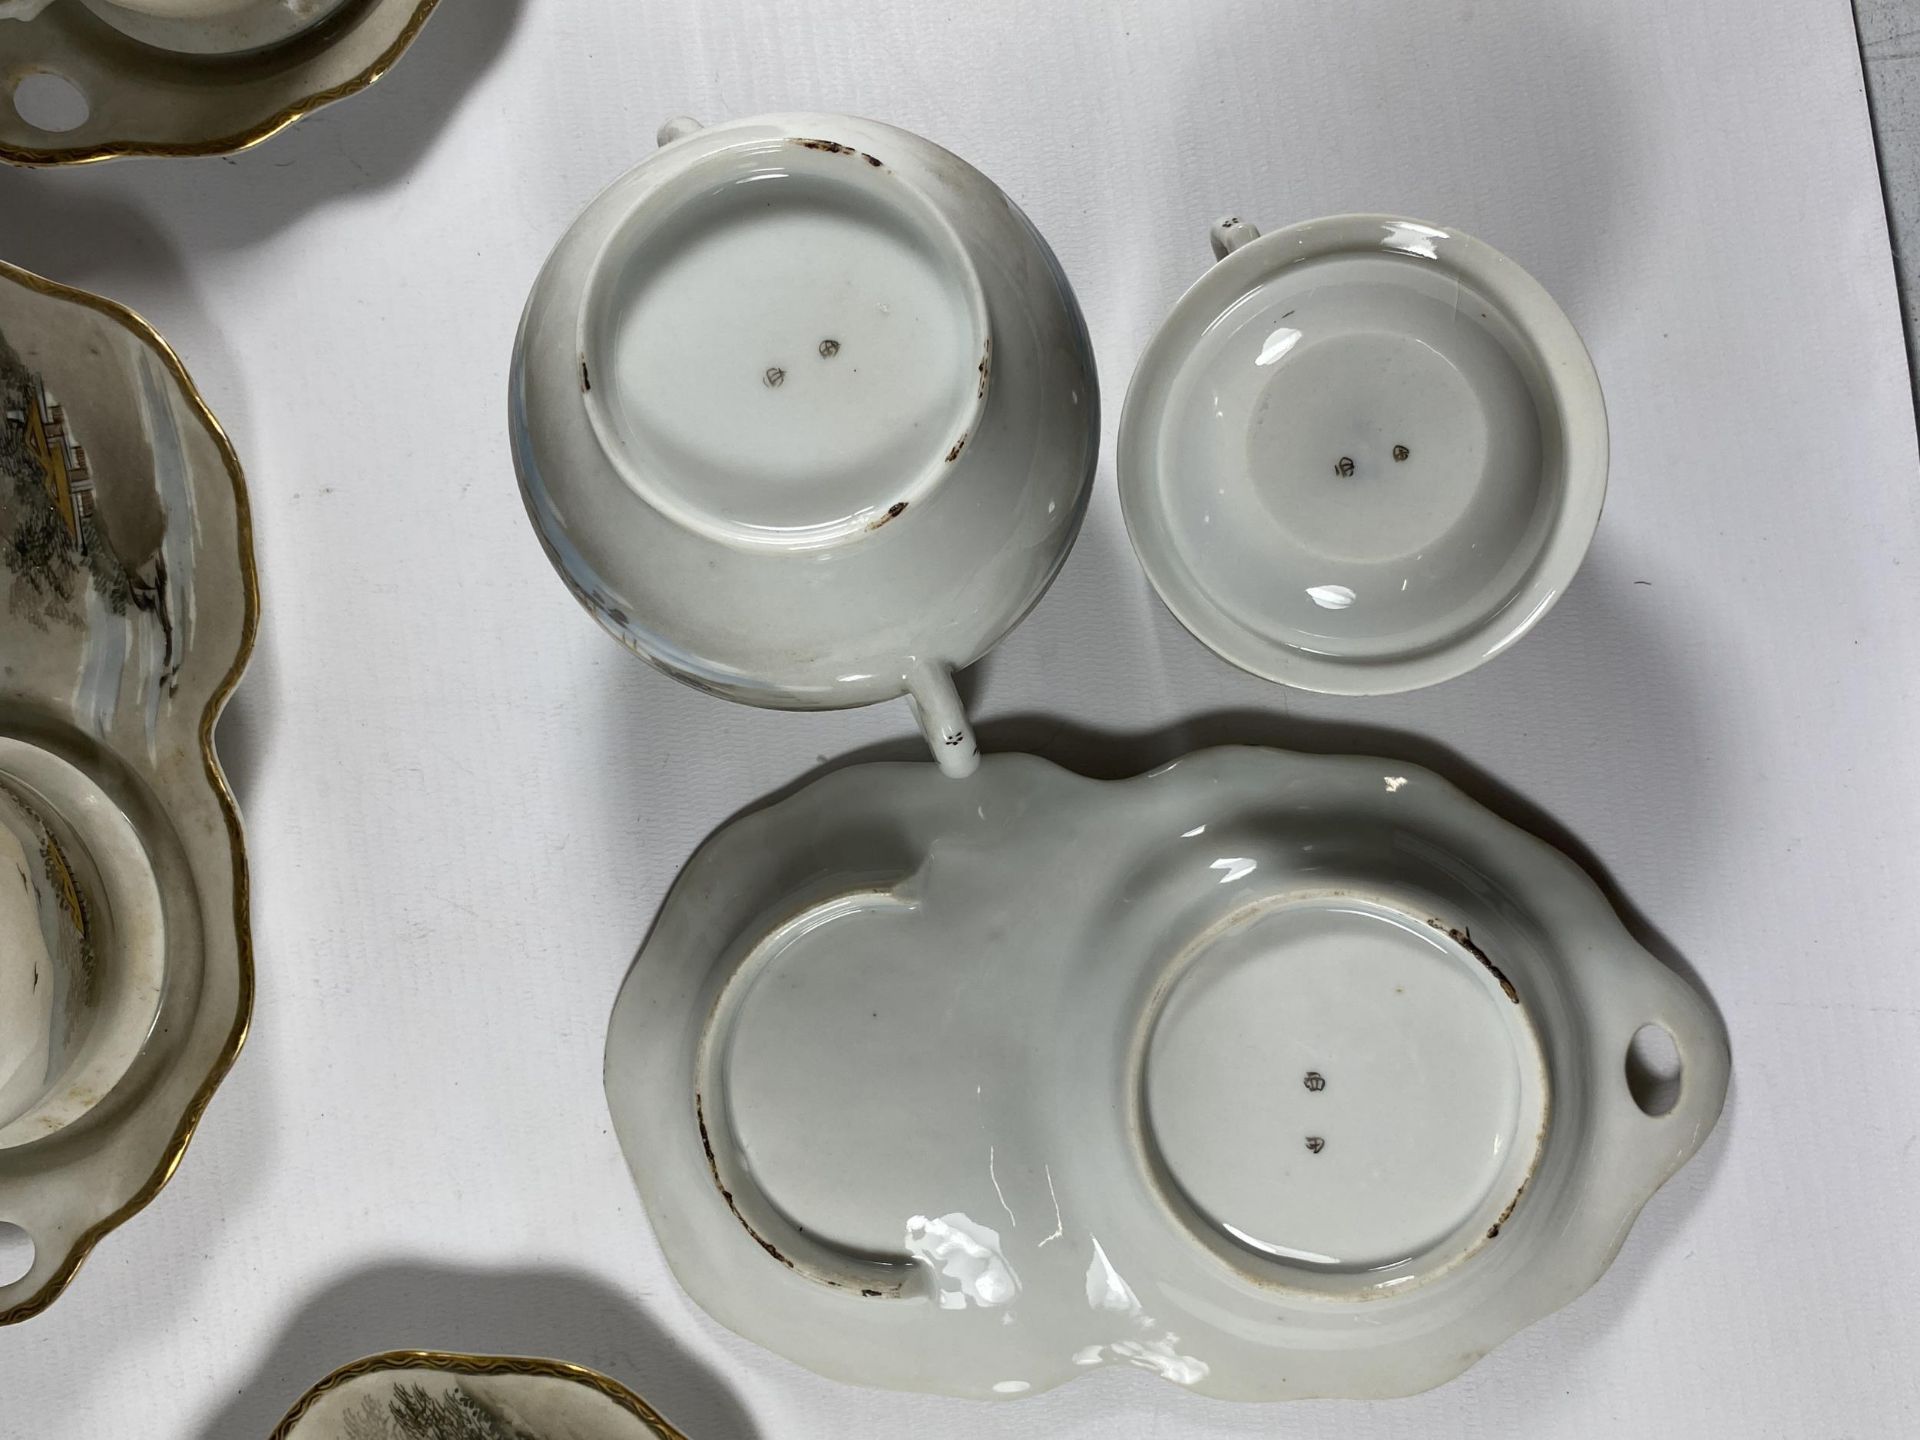 A LARGE CHINESE EGGSHELL PORCELAIN DINNER SERVICE COMPRISING TEAPOT, SUGAR BOWL, CREAM JUG & SIX - Image 6 of 7